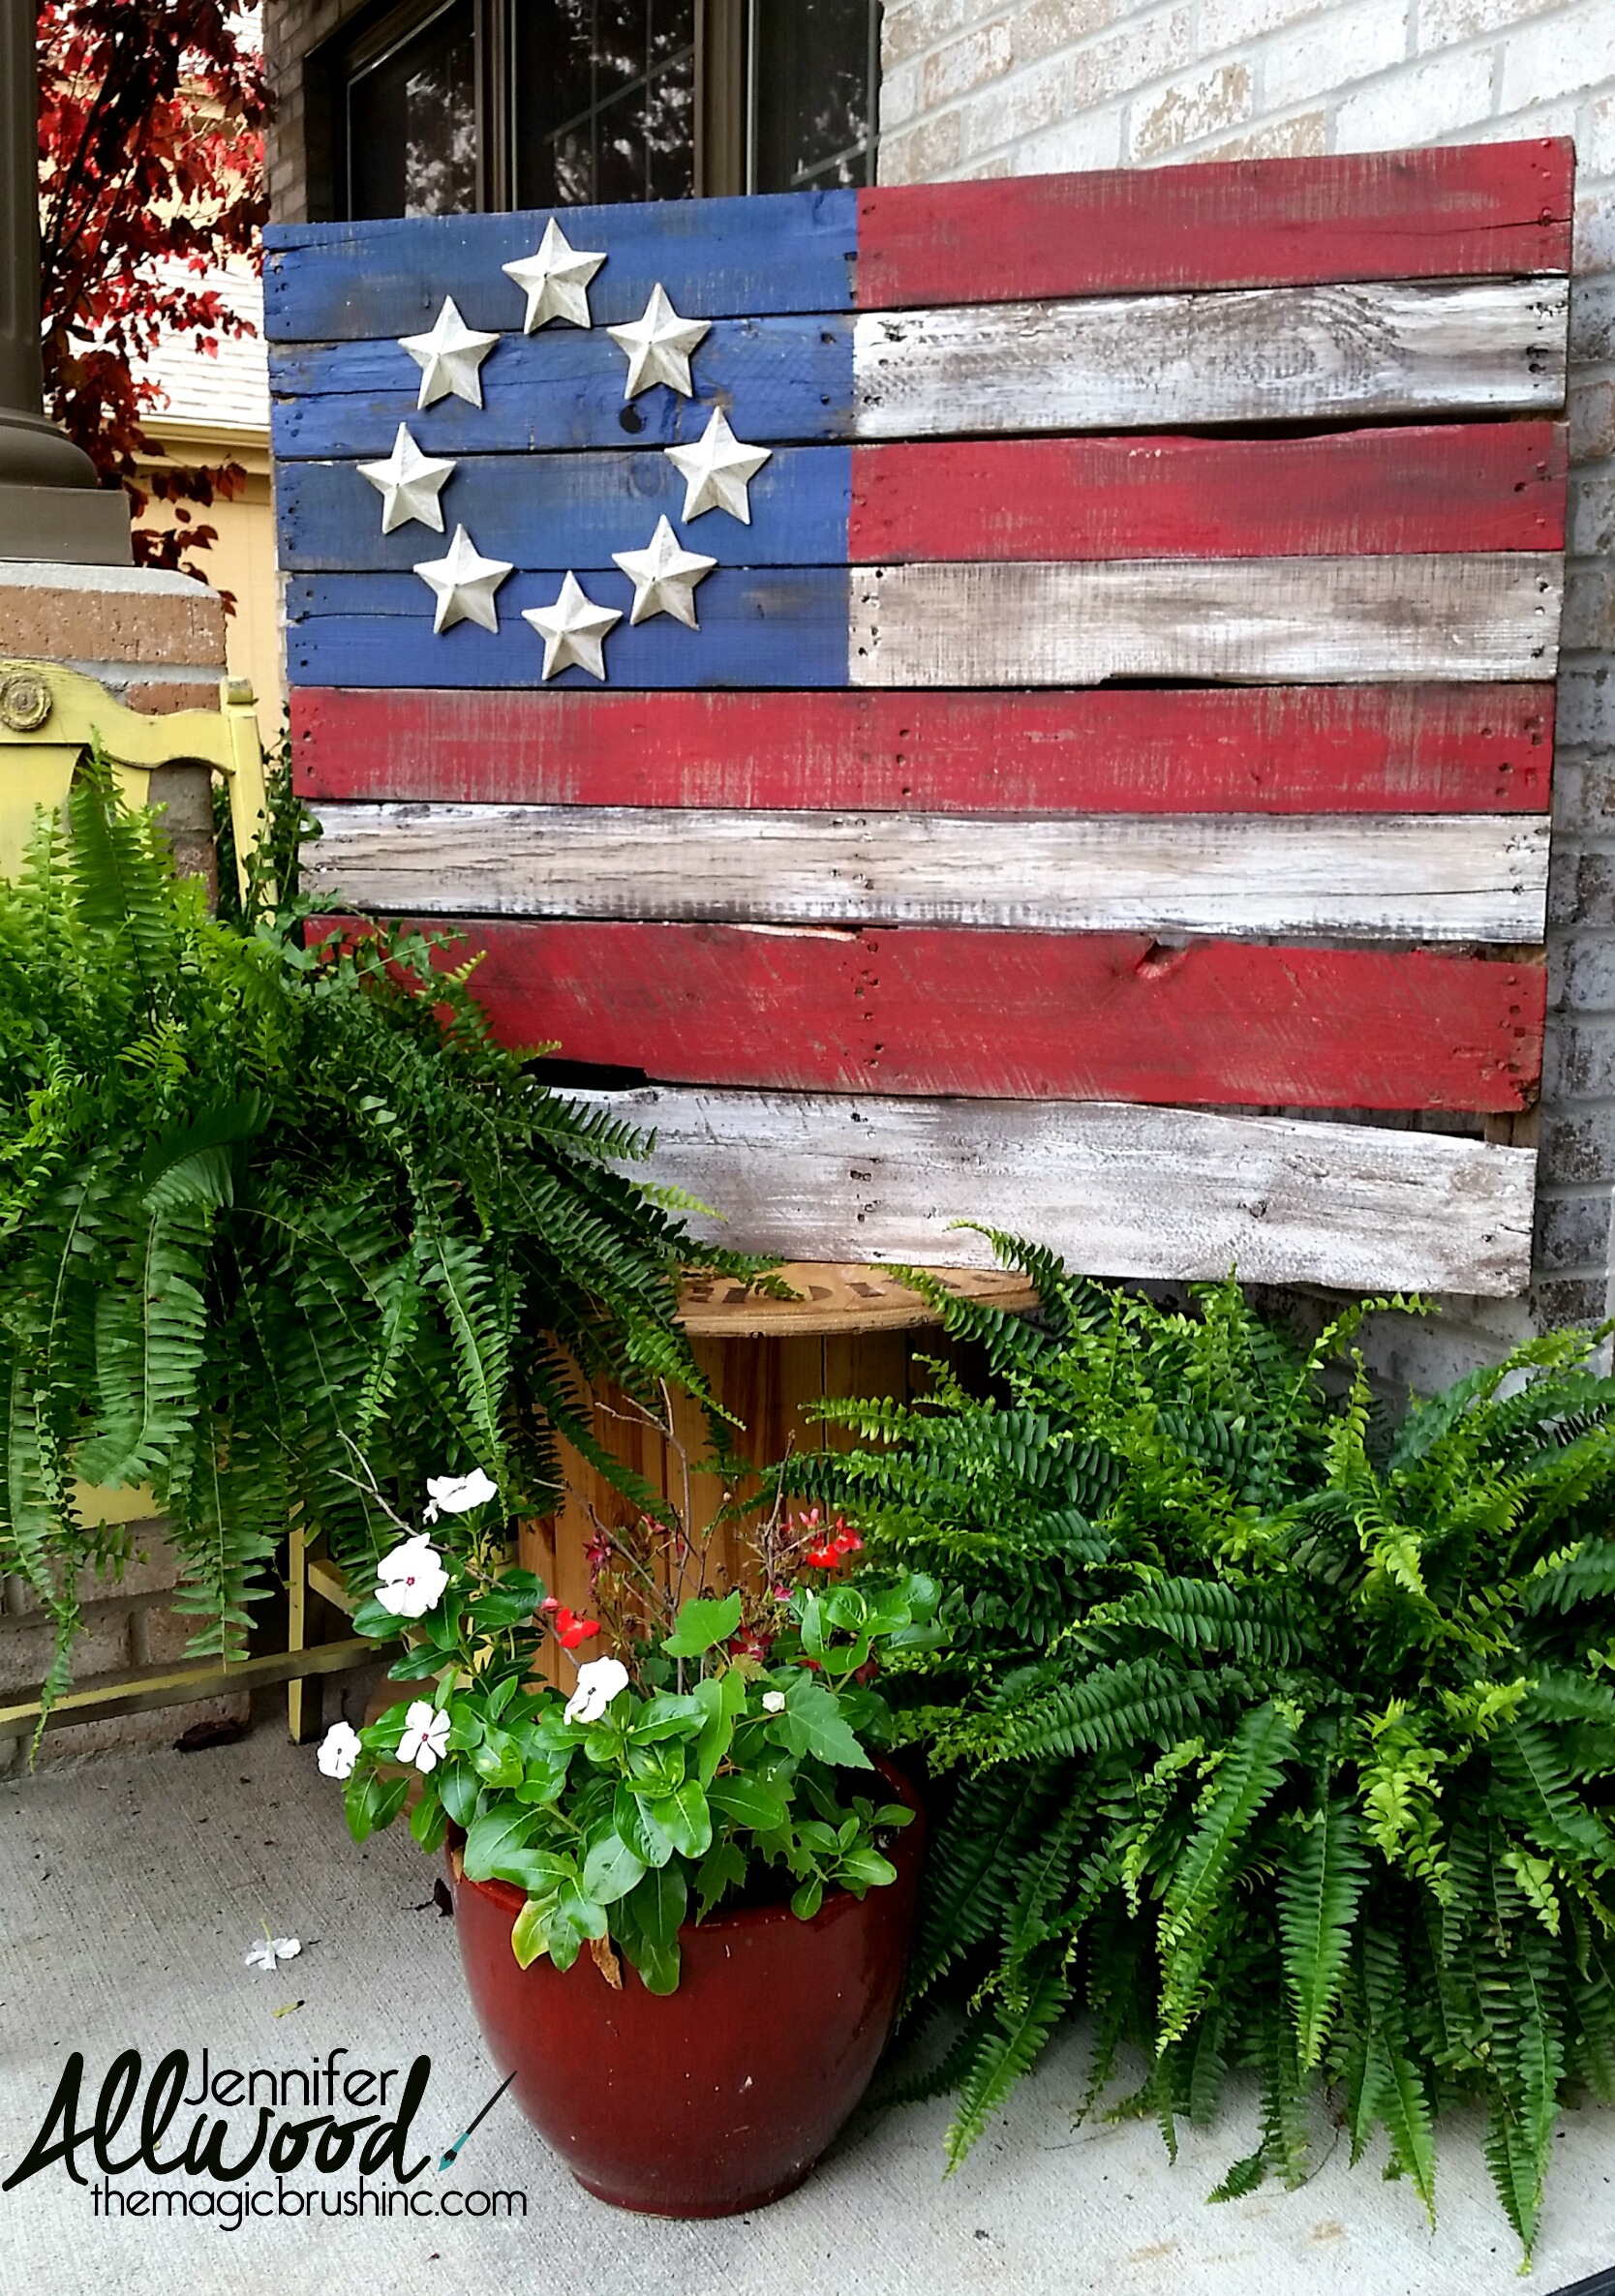 Patriotic Pallet Flags with paper mache stars - Best DIY 4th of July Decorations - The NavagePatch.com